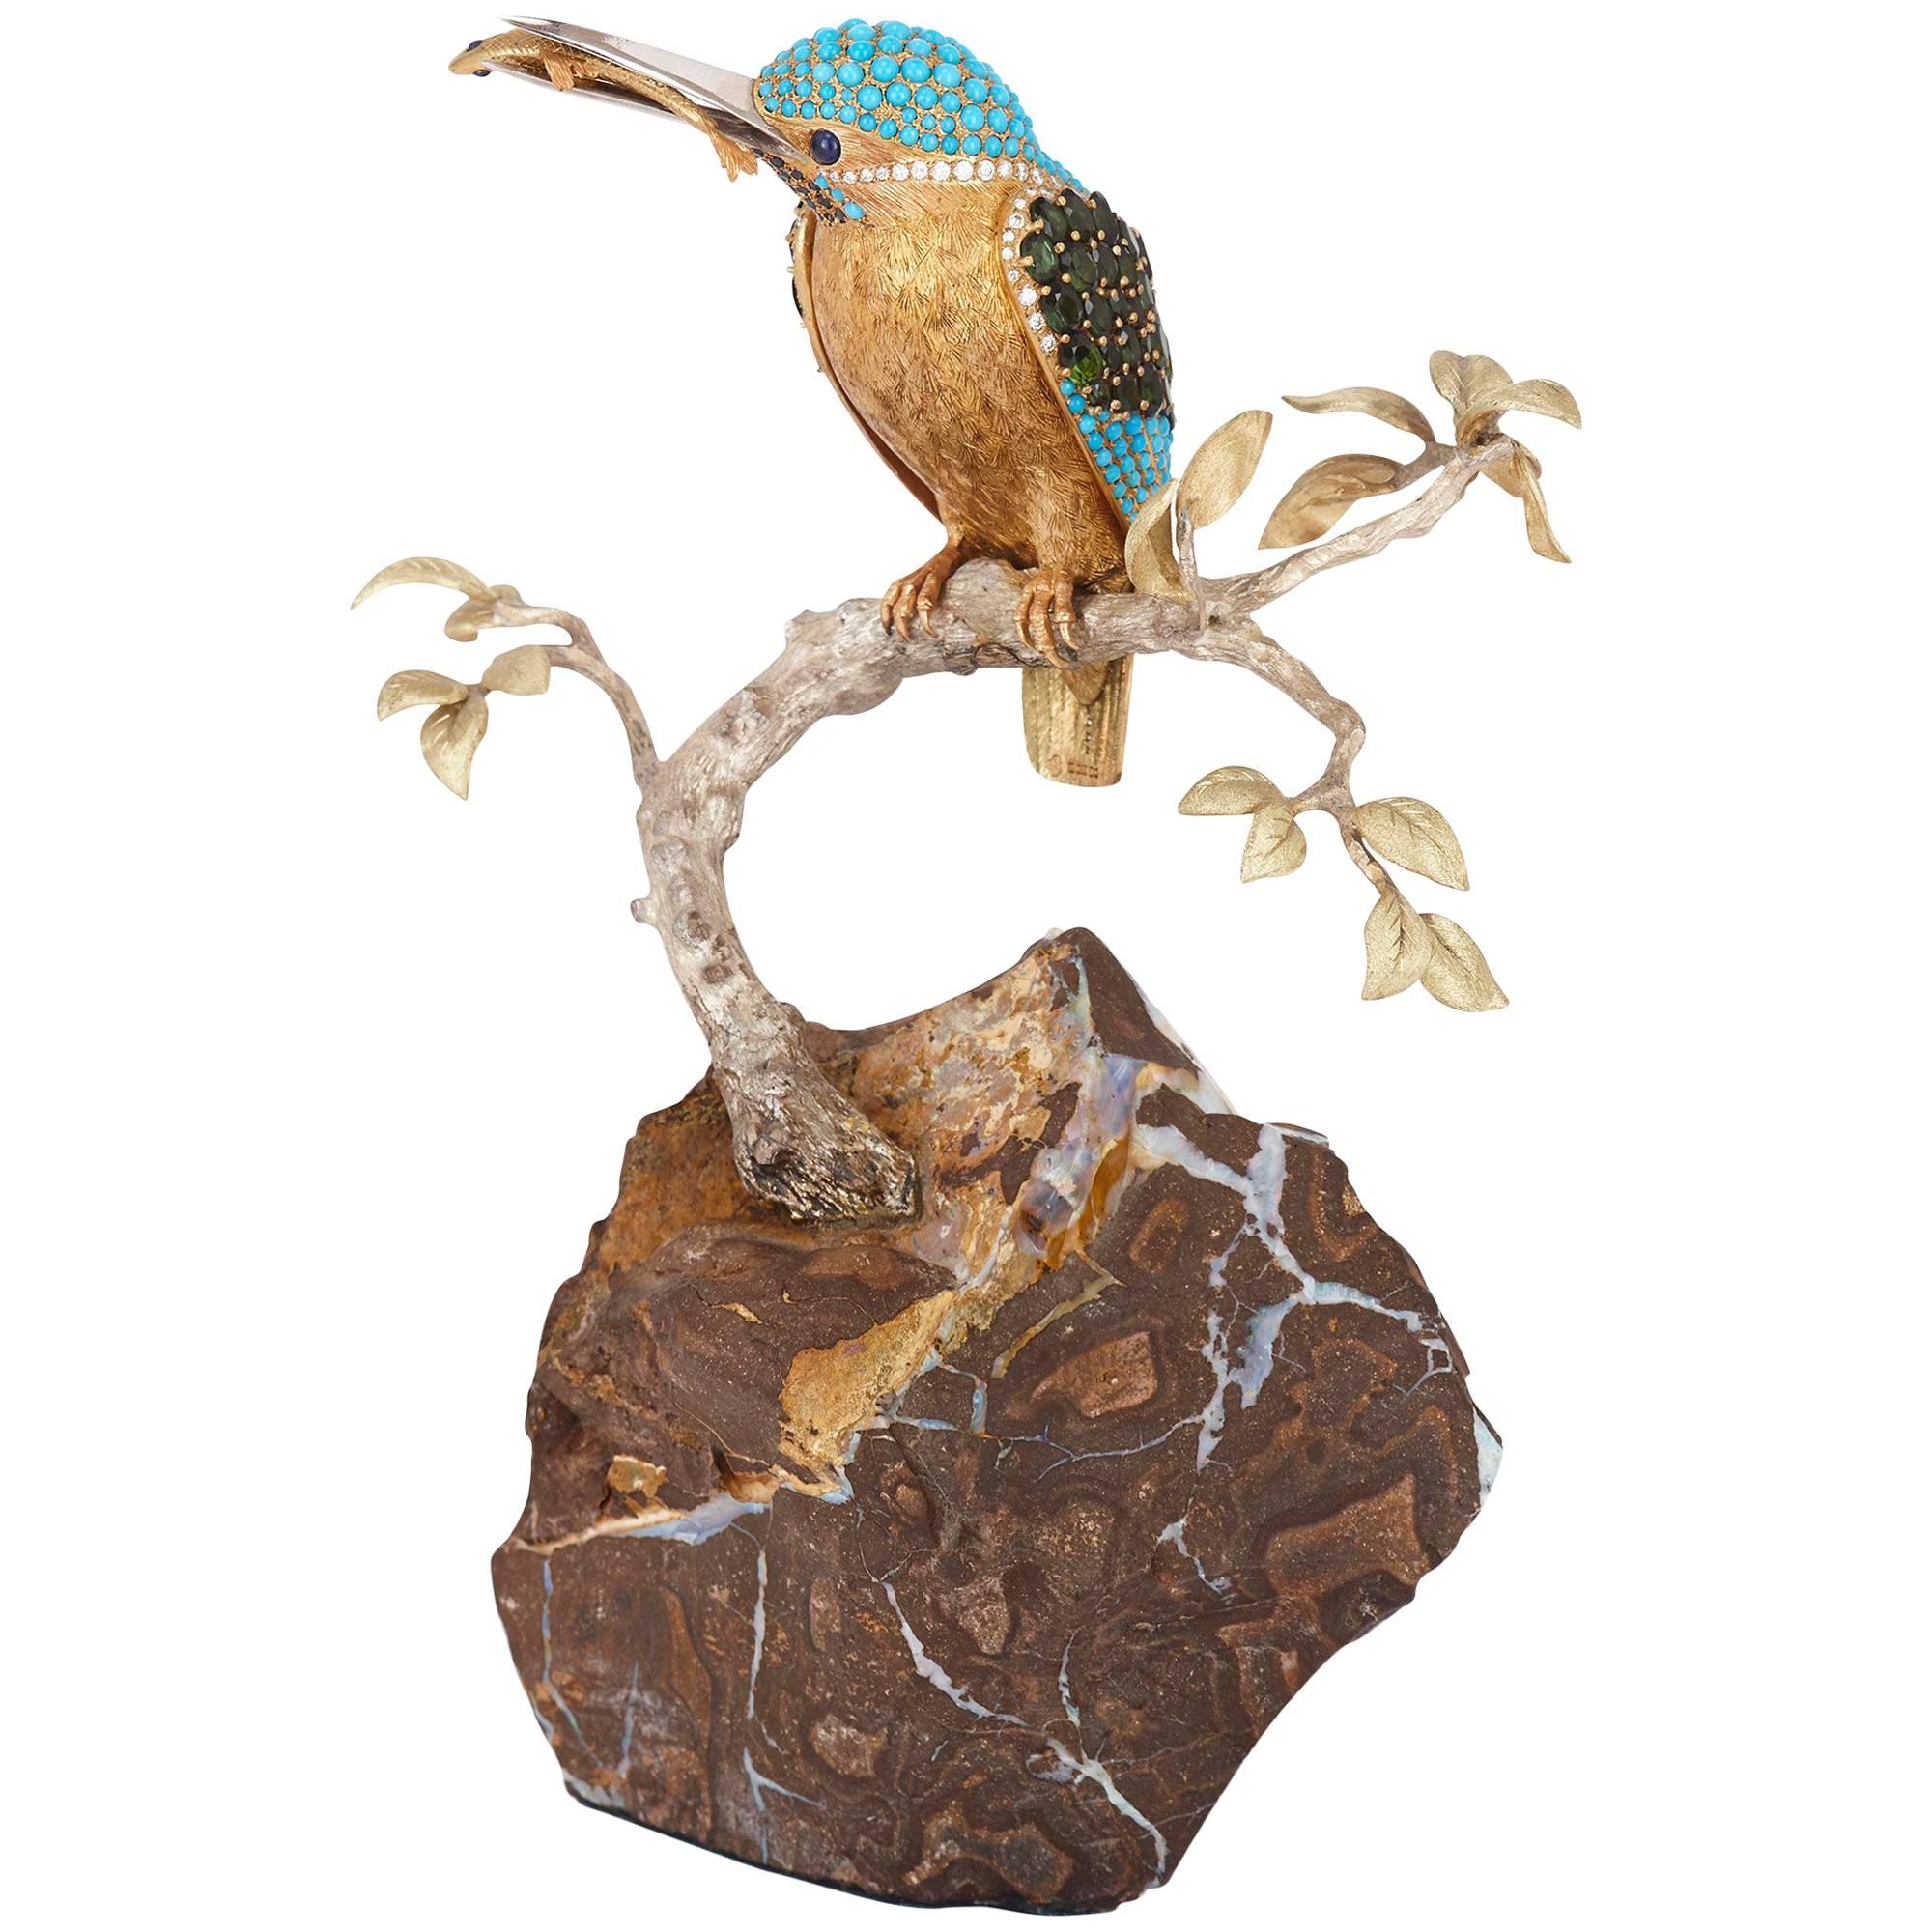 Gold and Gemstone Mounted Kingfisher Ornament by Asprey